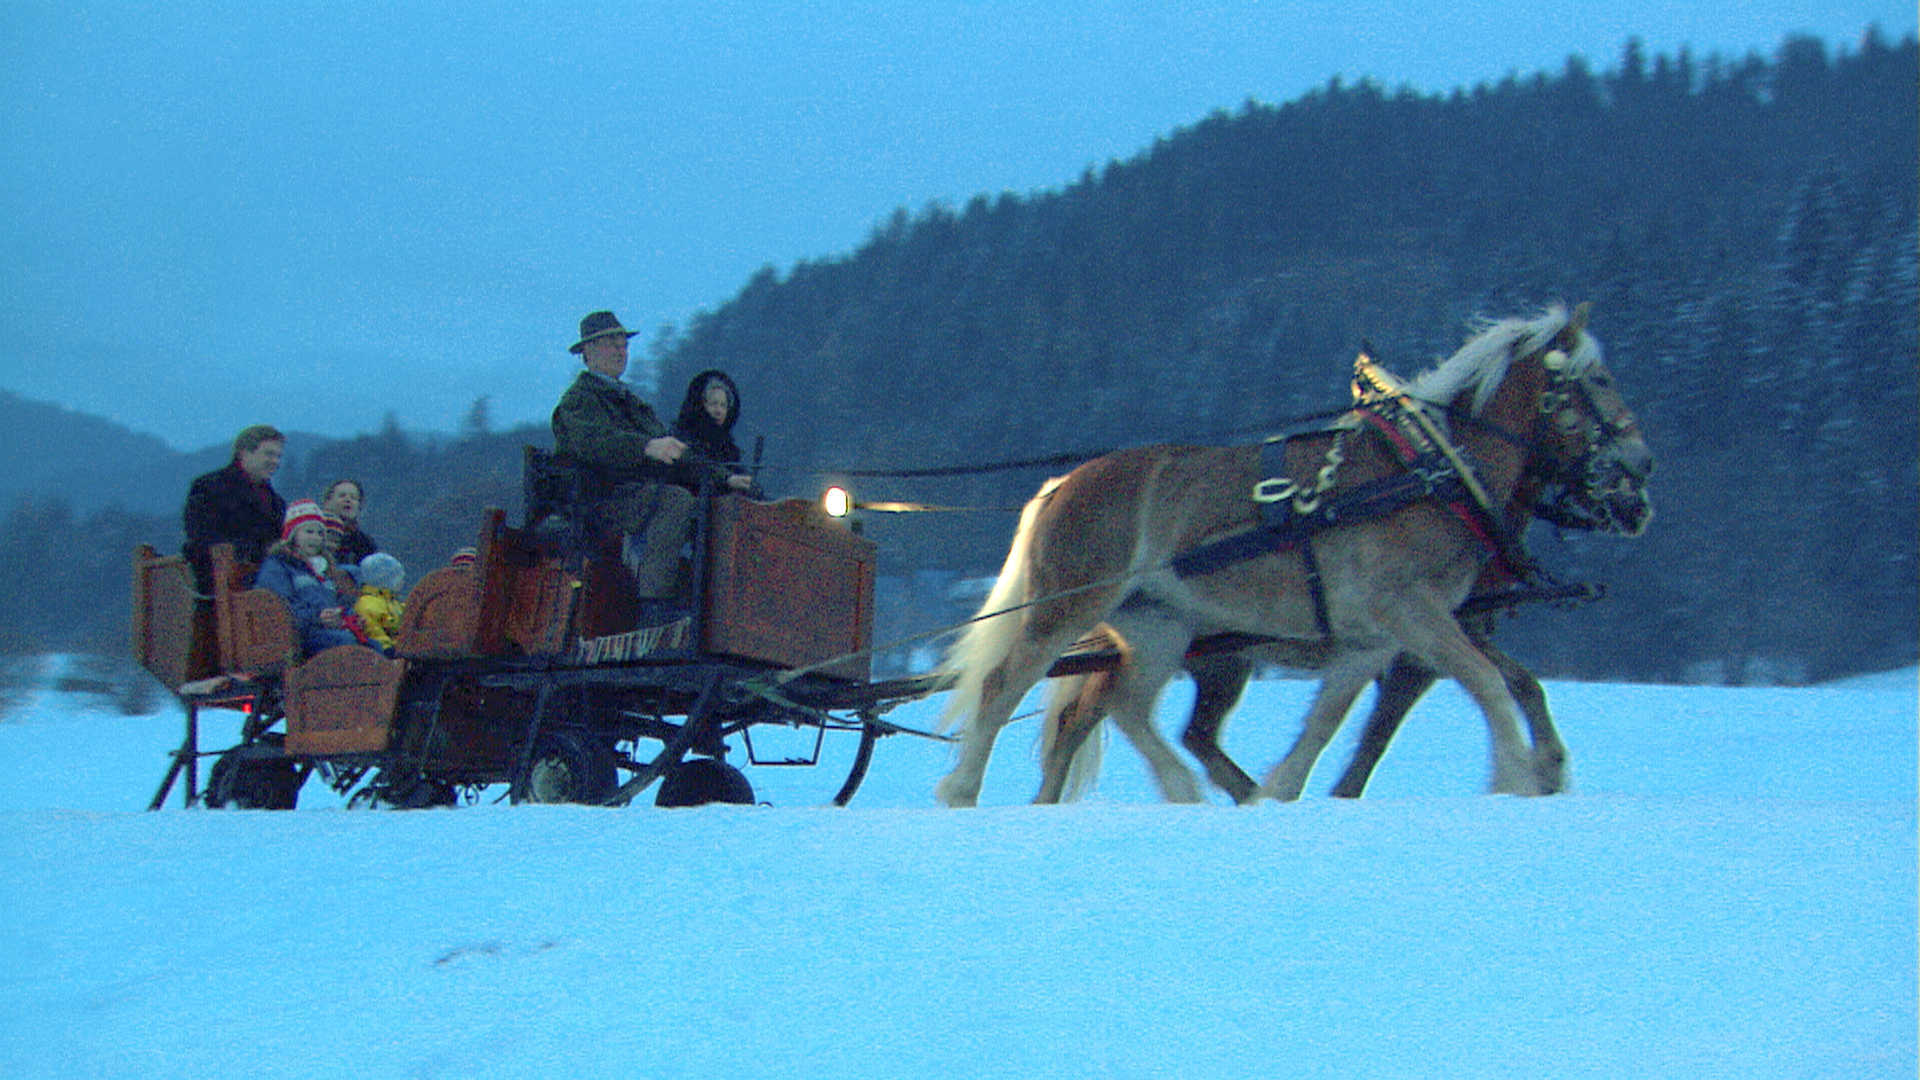 Sleighride at dusk in the Alps